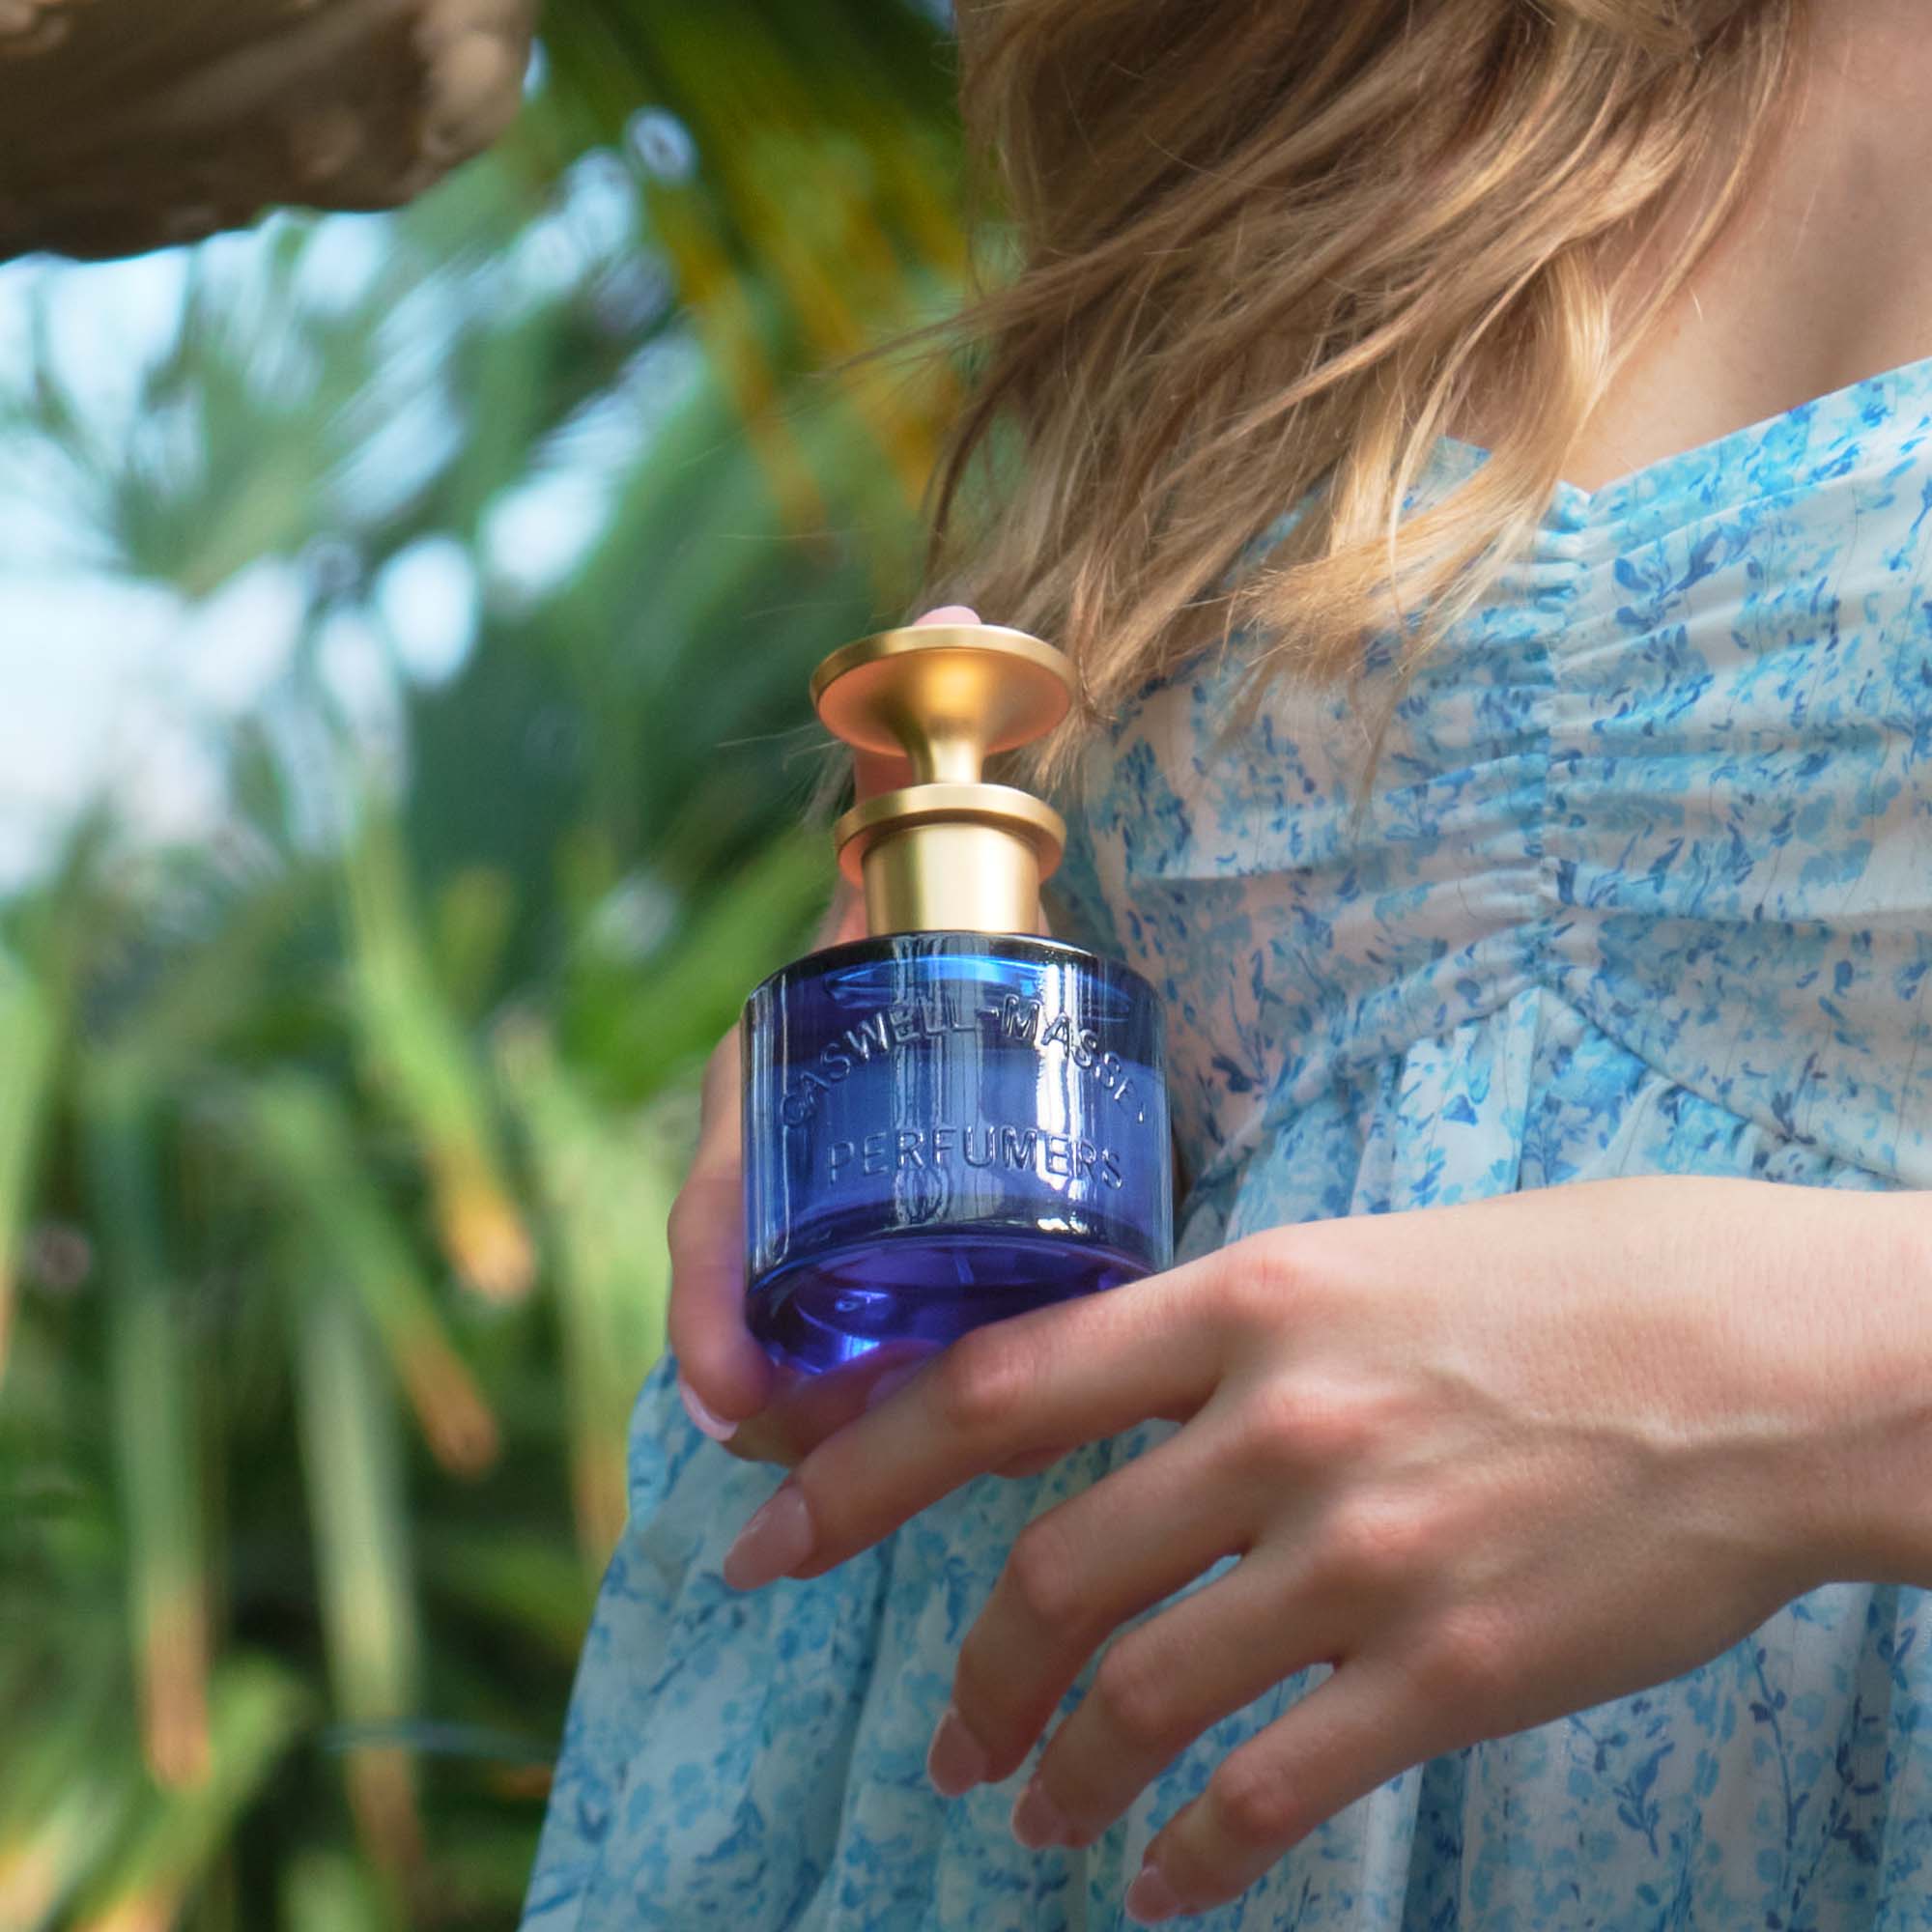 Caswell-Massey Elixir of Love Eau de Toilette (60 mL), woman holding the fragrance bottle, cobalt blue with gold cap, in her hands in front of a floral sundress with soft blue floral pattern